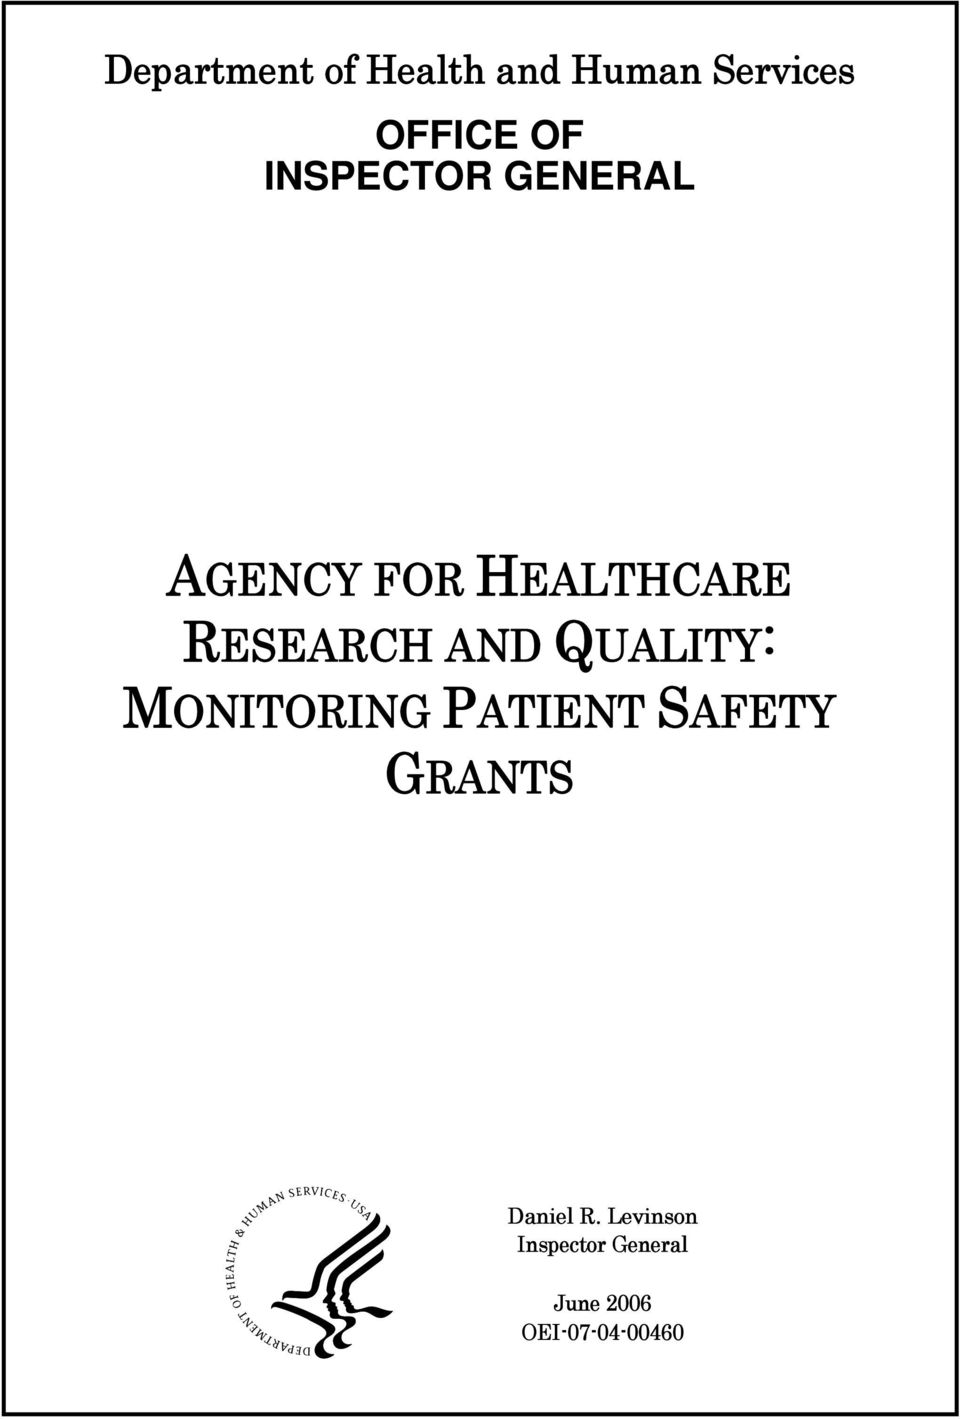 AND QUALITY: MONITORING PATIENT SAFETY GRANTS